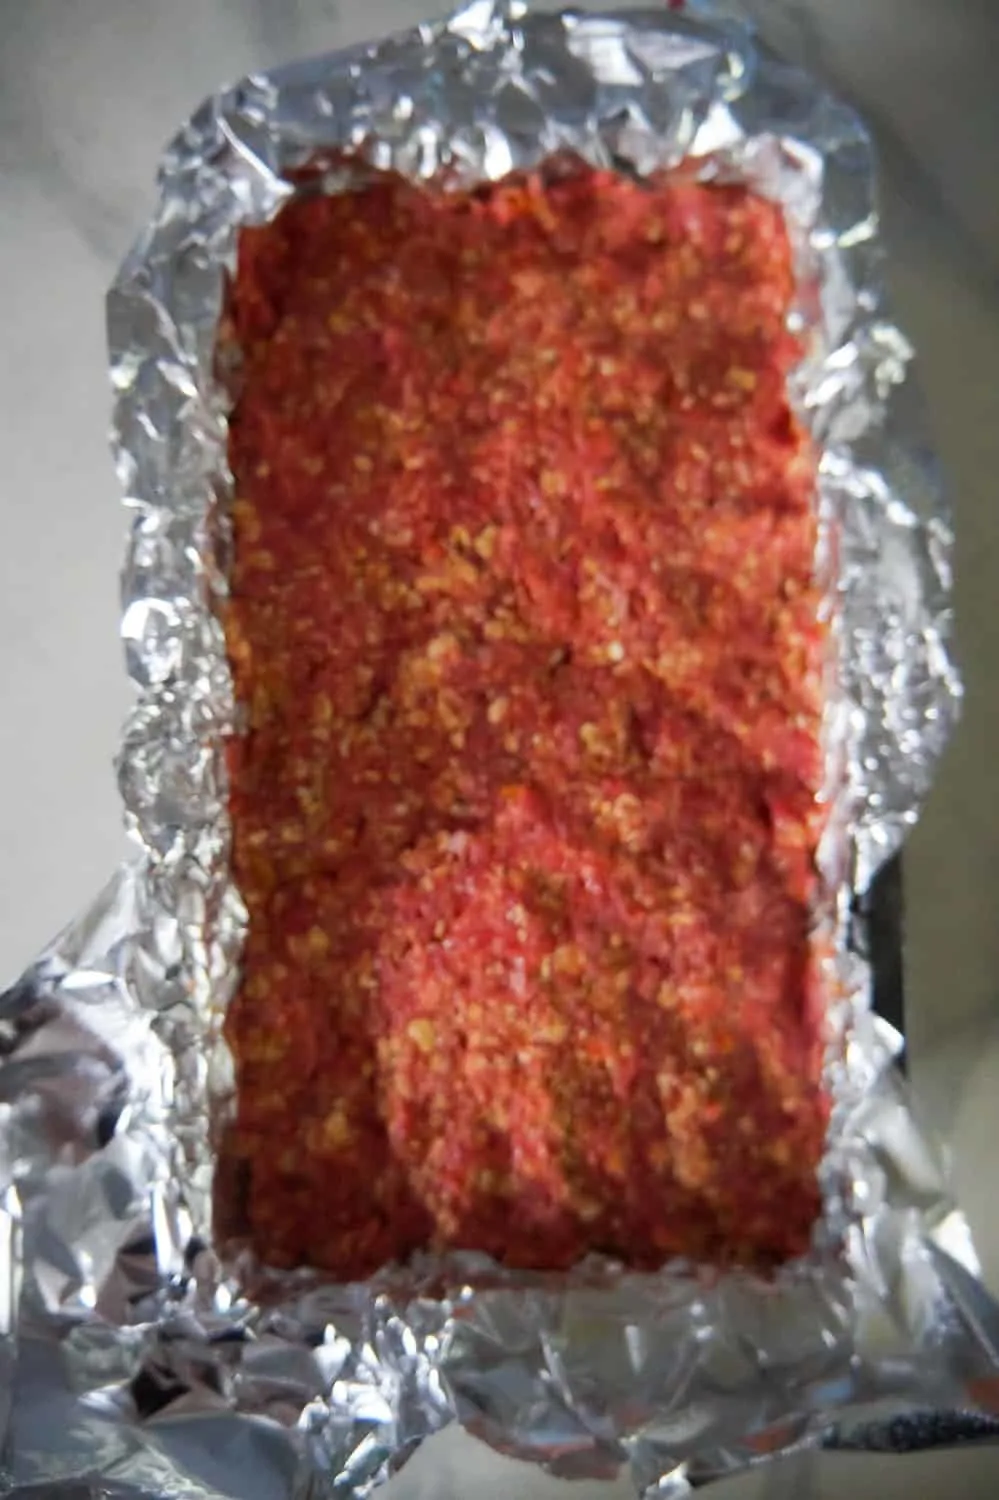 uncooked meatloaf in a loaf pan lined with aluminum foil